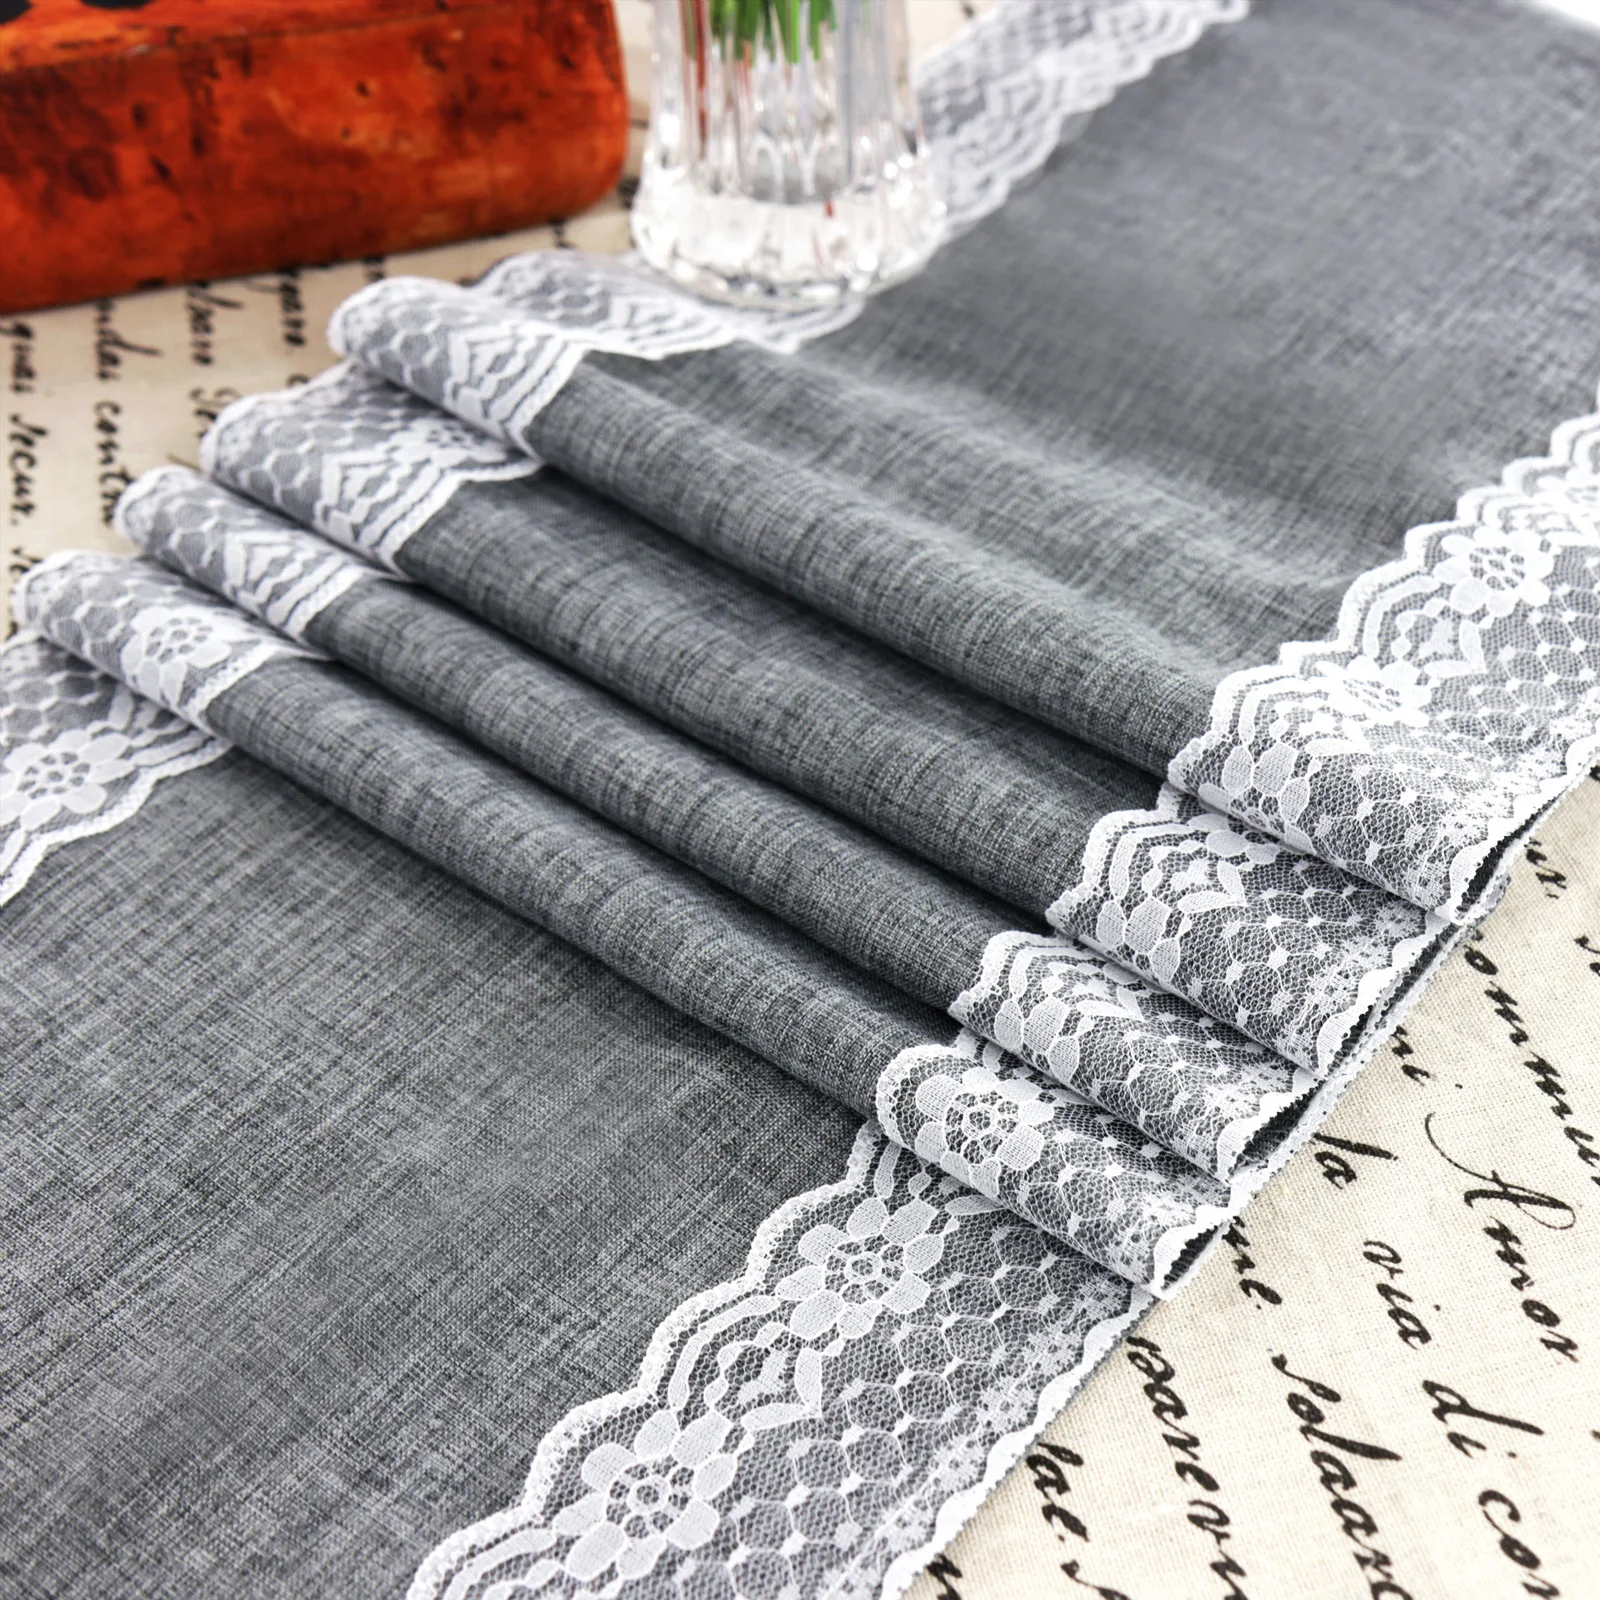 

Burlap Lace Table Runners Rustic Wedding Natural Jute Burlap Hessian Table Runner Country Outdoor for Home Party Decoration